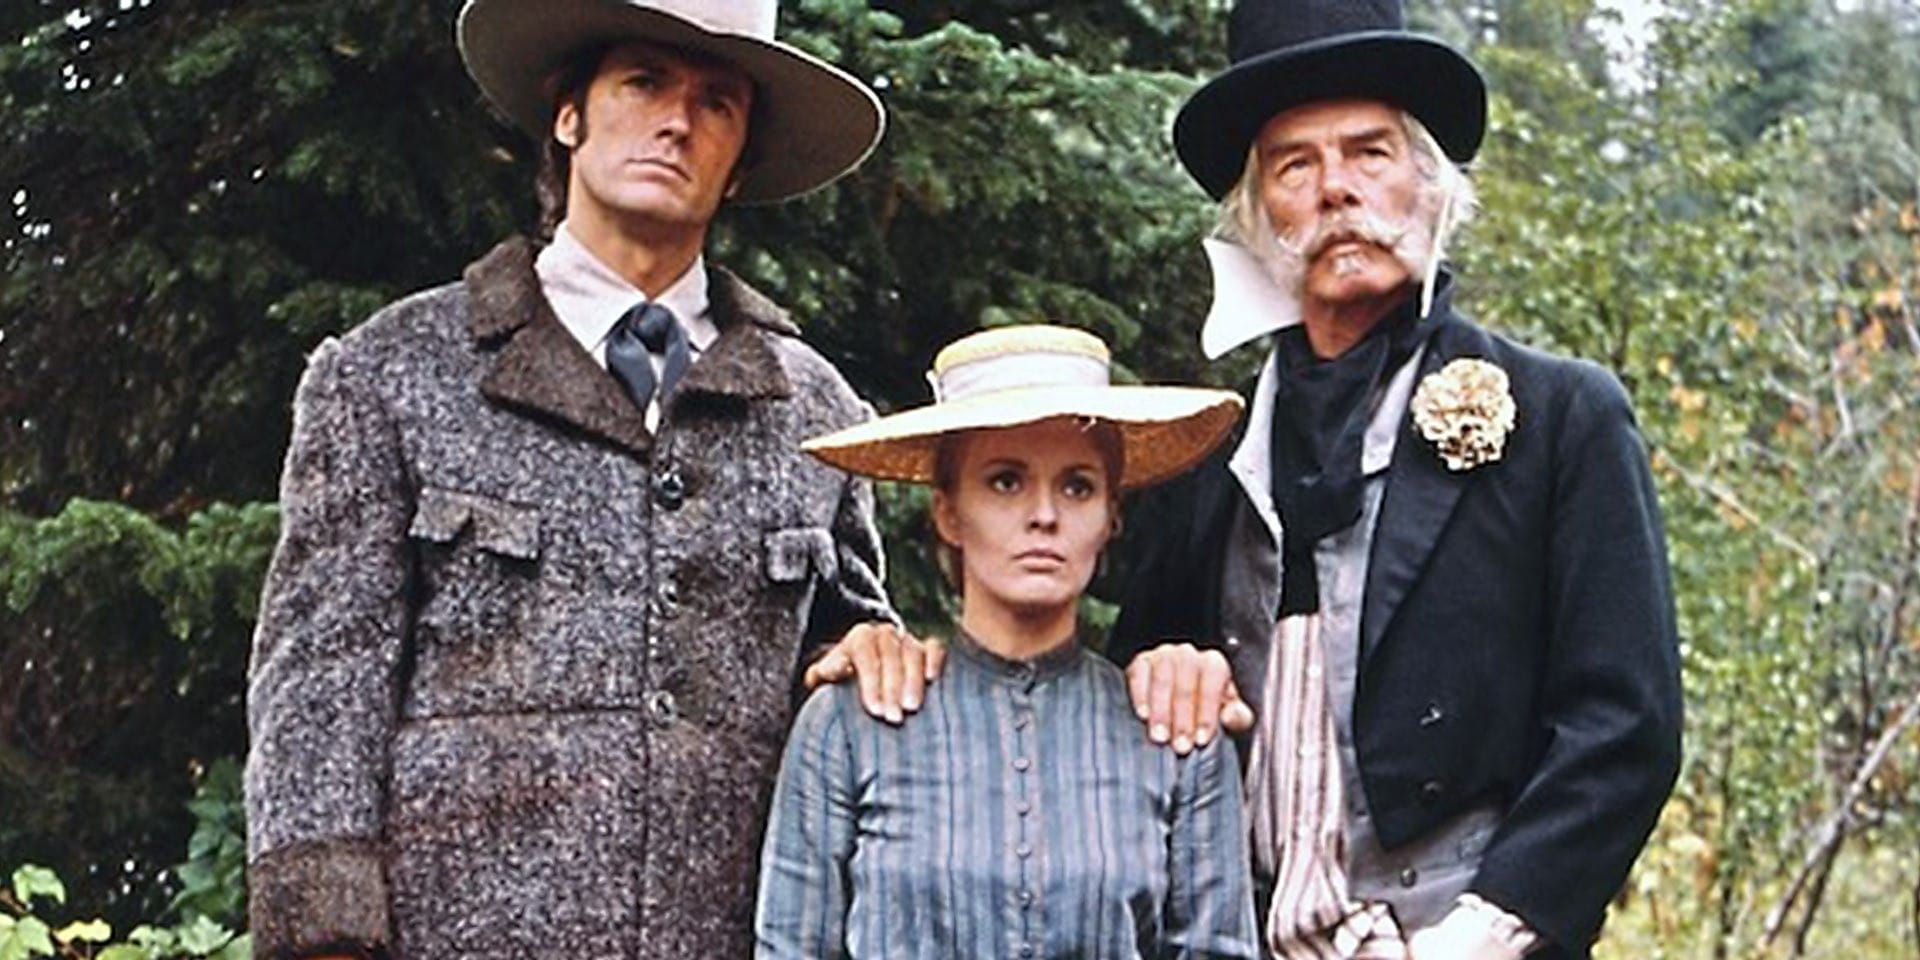 Clint Eastwood, Jean Seberg and Lee Marvin play central trio in 'Paint Your Wagon'